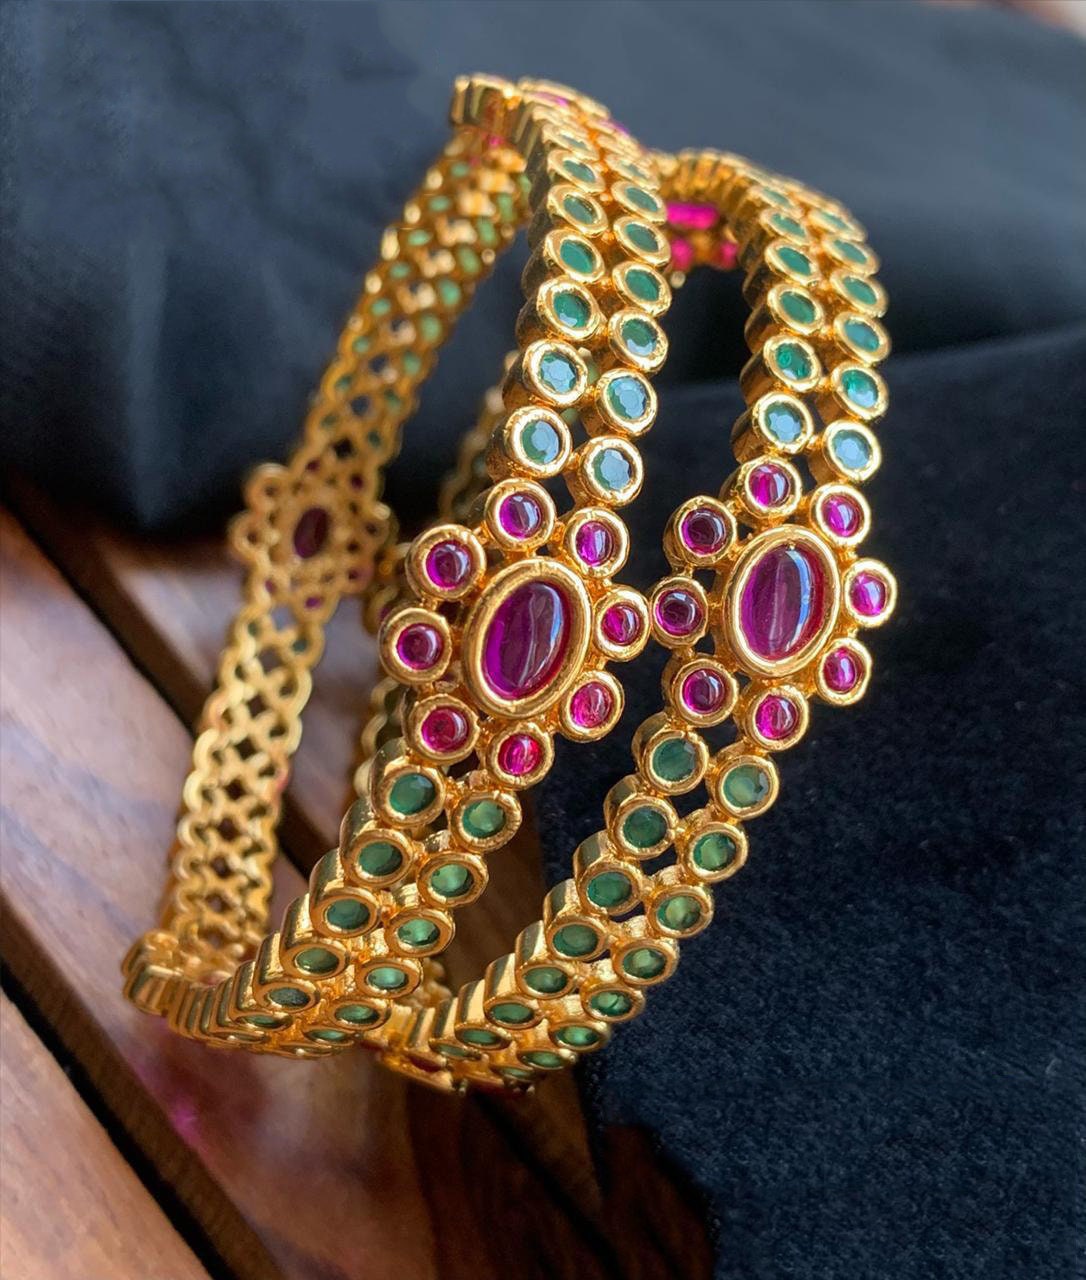 Green stone studded bangles | One Gram Gold Design Kemp Traditional bangles set of 2 | Traditional South Indian Floral Design Kemp Bangles